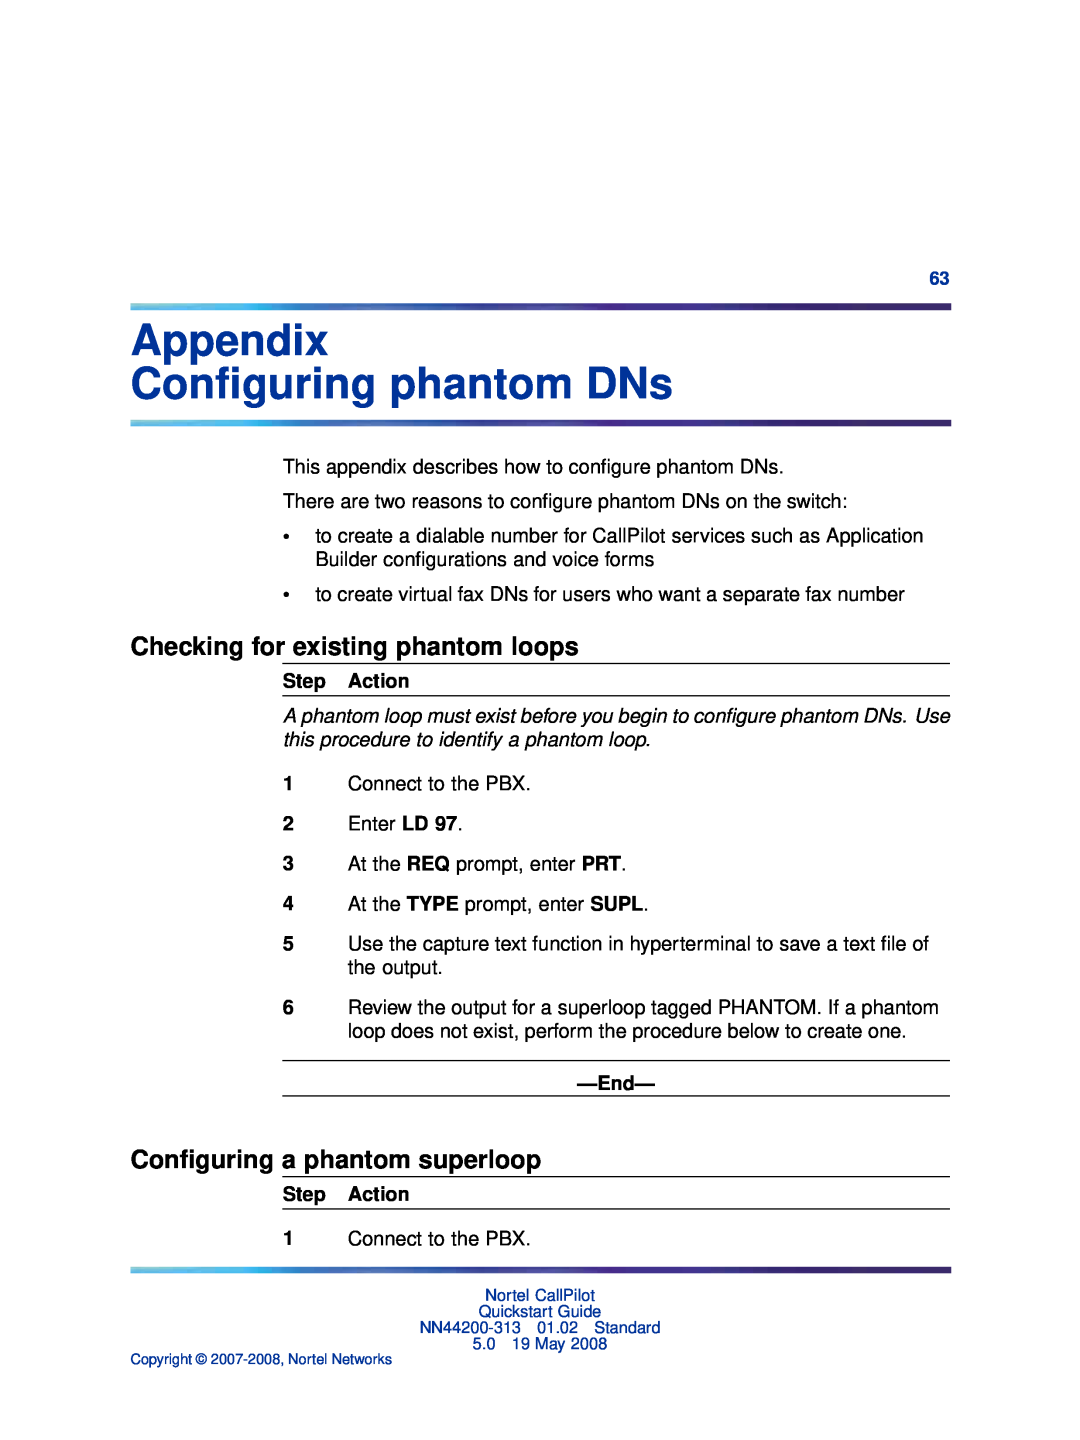 Nortel Networks NN44200-313 quick start Appendix Conﬁguring phantom DNs, Checking for existing phantom loops, Step Action 